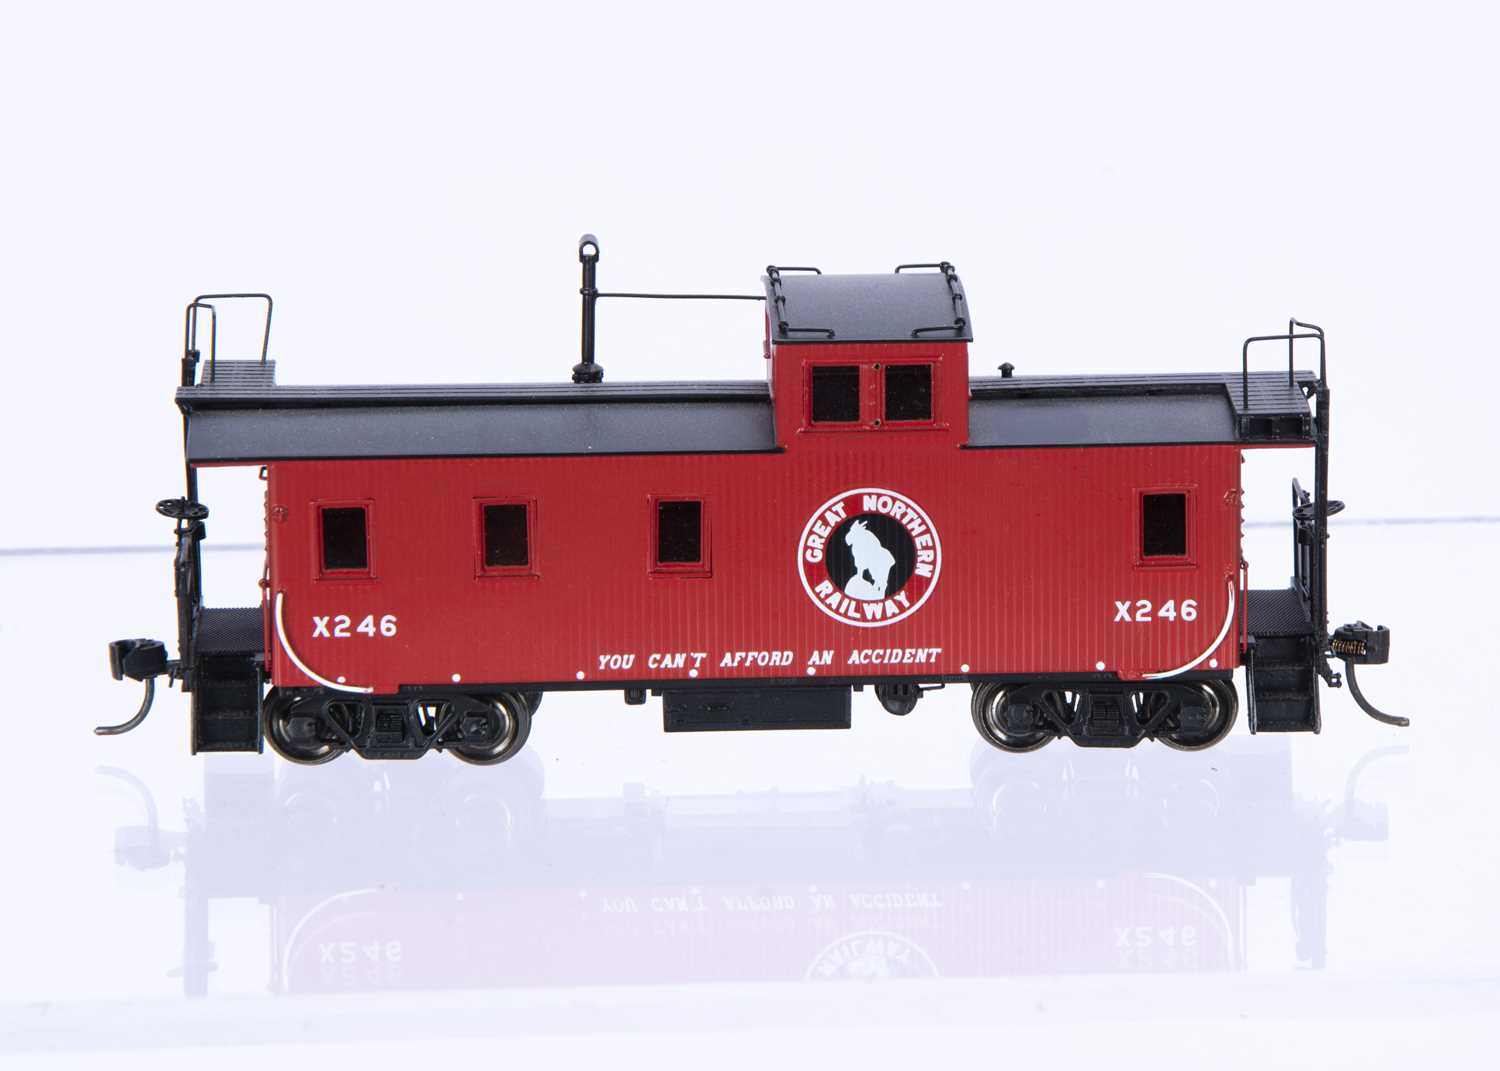 Overland Models Inc H0 Gauge GN 30 Wood Caboose #X246 with Andrews Trucks Factory Painted Red/Black